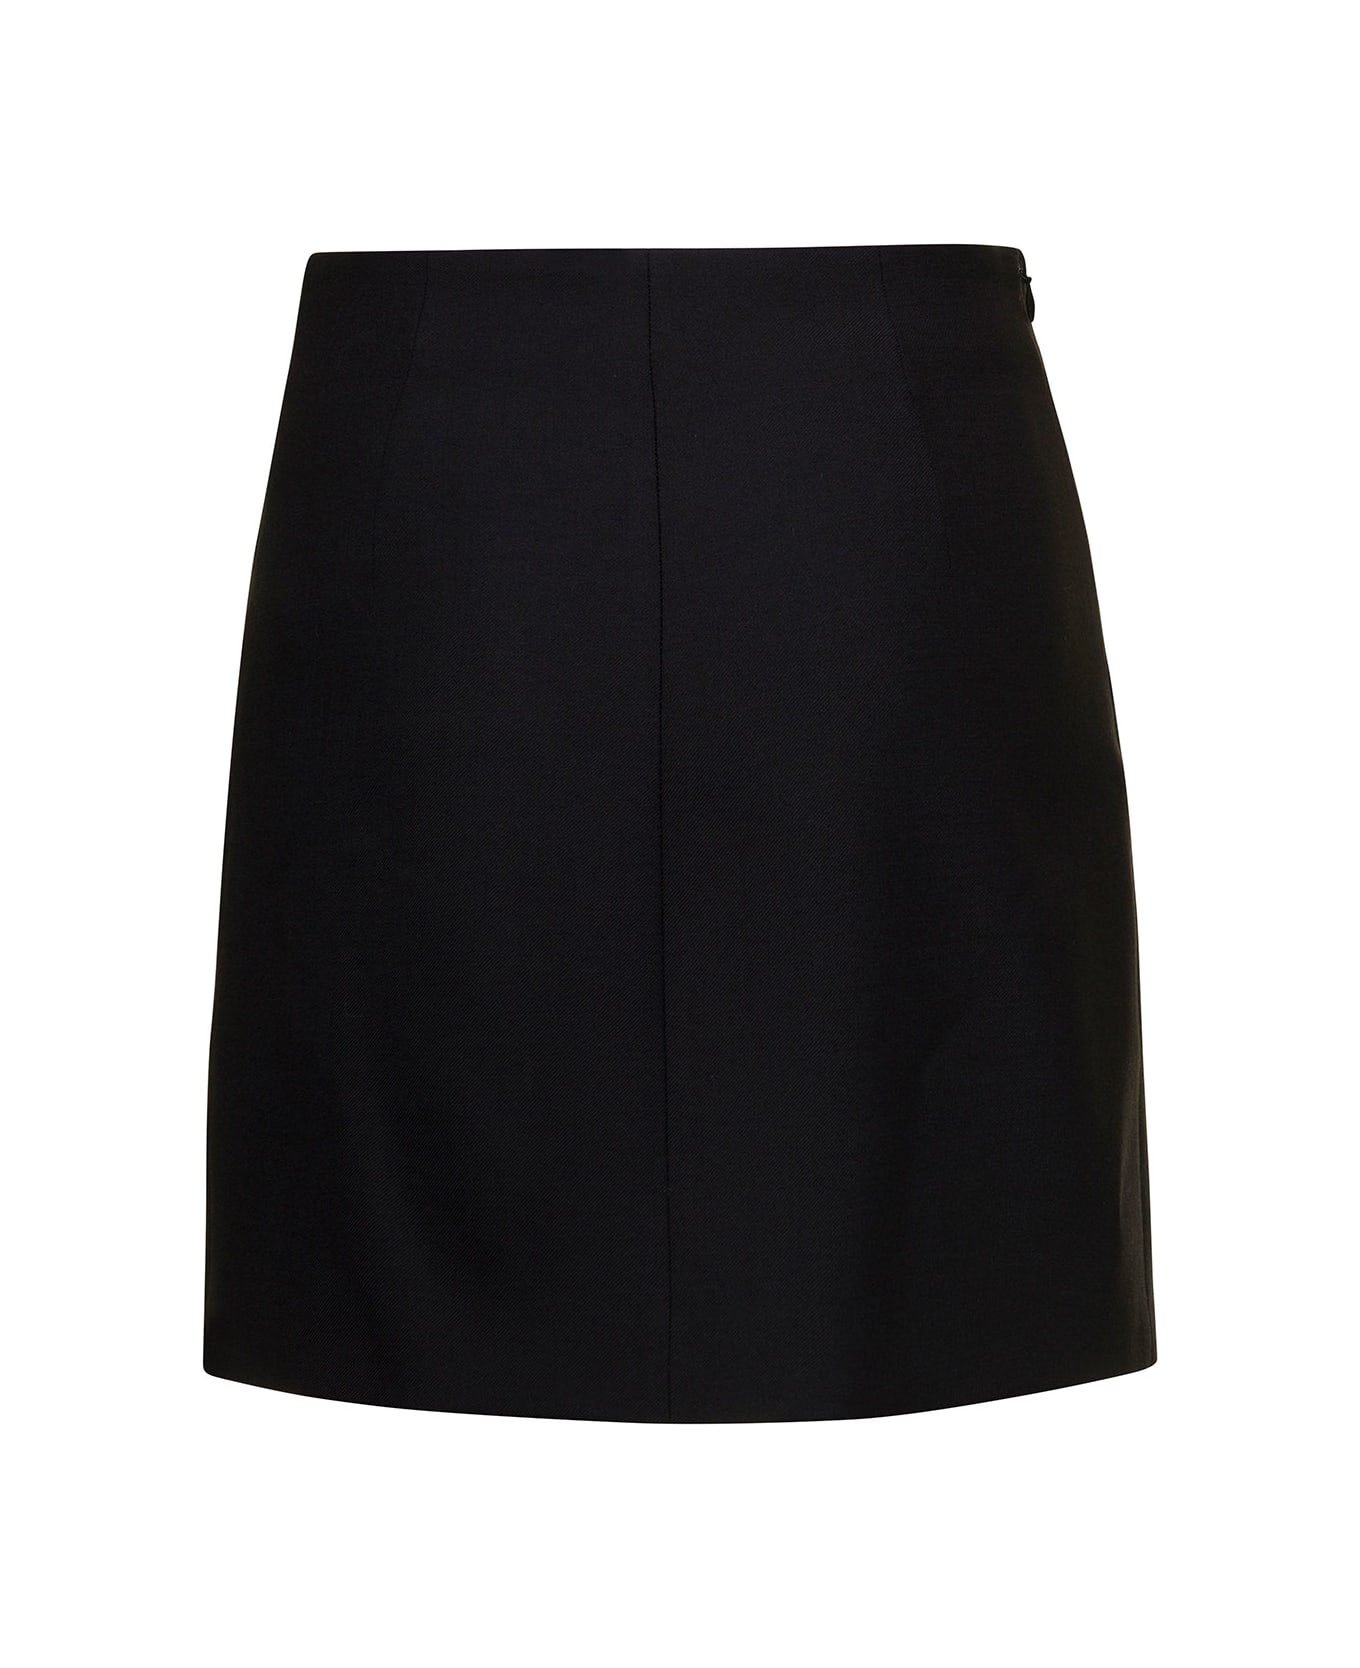 Off-White Black Mini Skirt With Split And Contrasting Logo Print In Stretch Cotton Blend Woman - Black